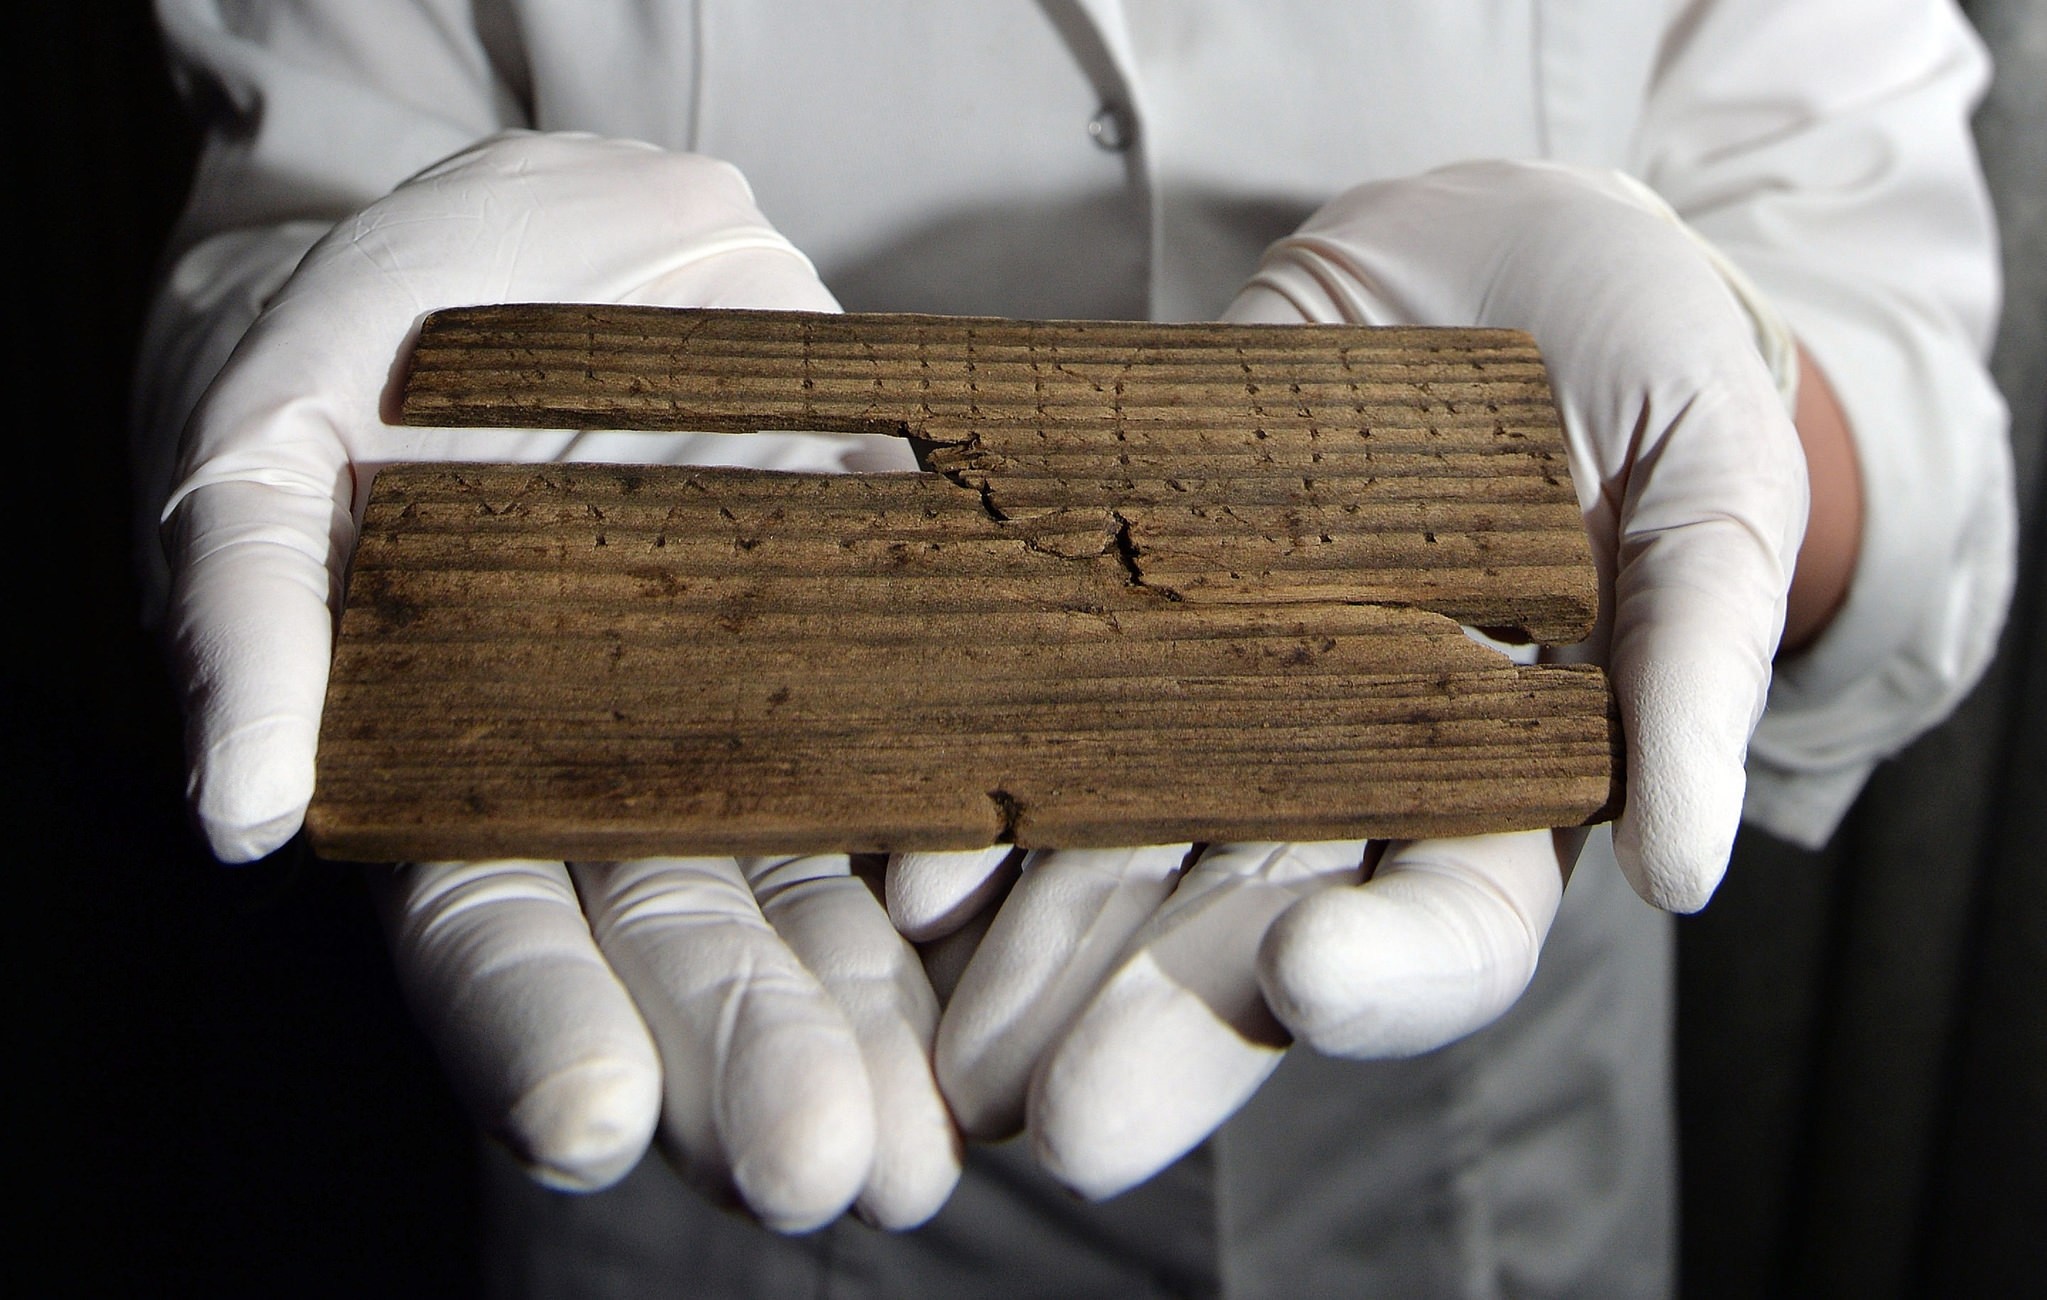 Luisa Duarte, a conservator for the Museum of London, holds a piece of wood with the Roman alphabet written on it in, in London, Wednesday, June 1, 2016 (AP Photo